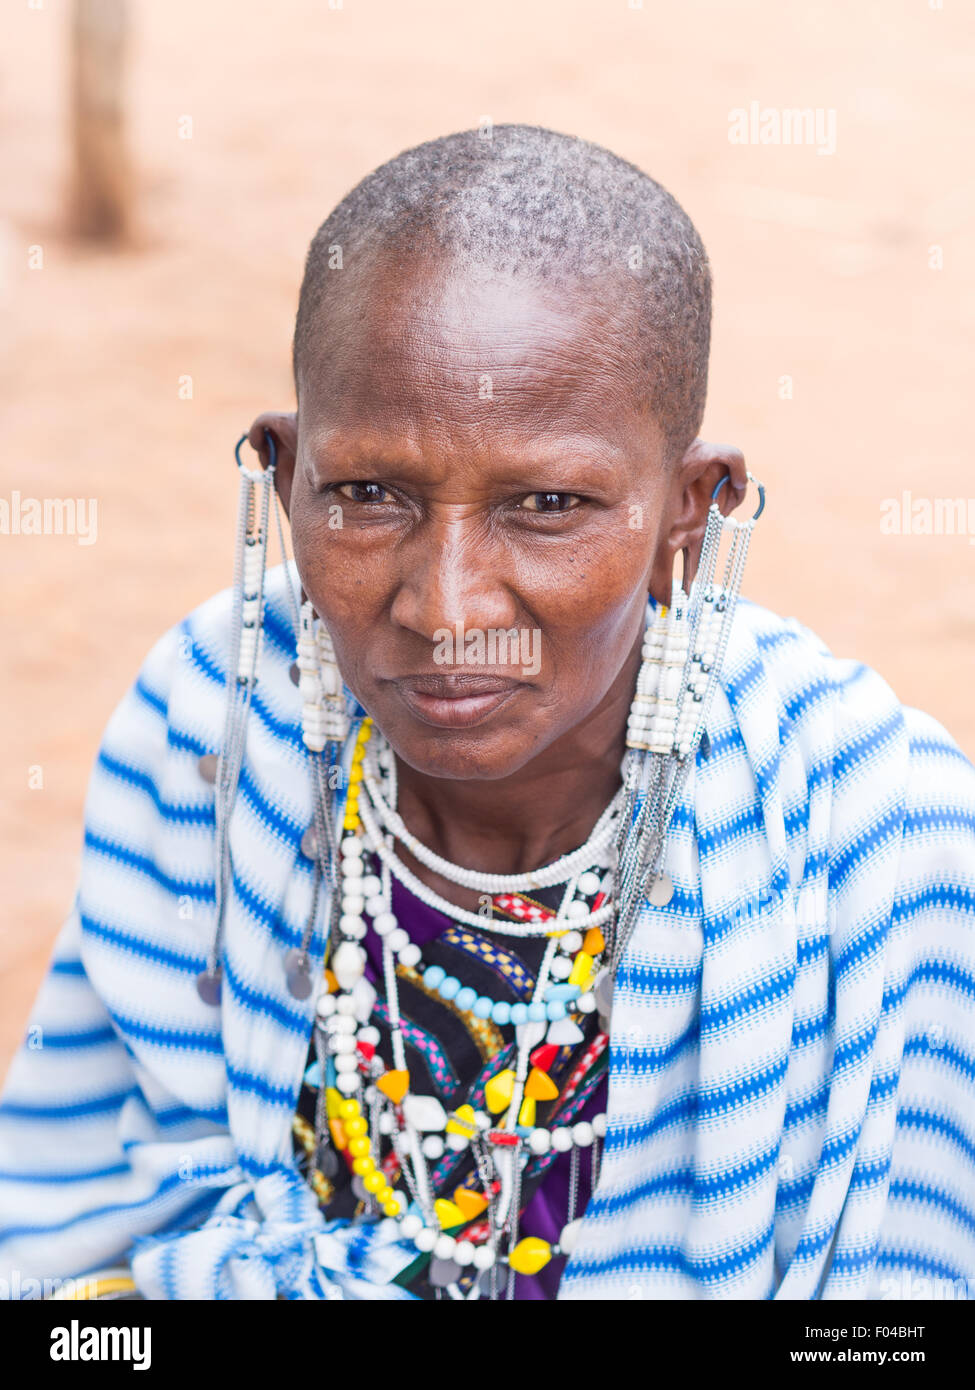 Maasai woman wearing earrings in stretched earlobes and traditional necklaces on a local market. Stock Photo